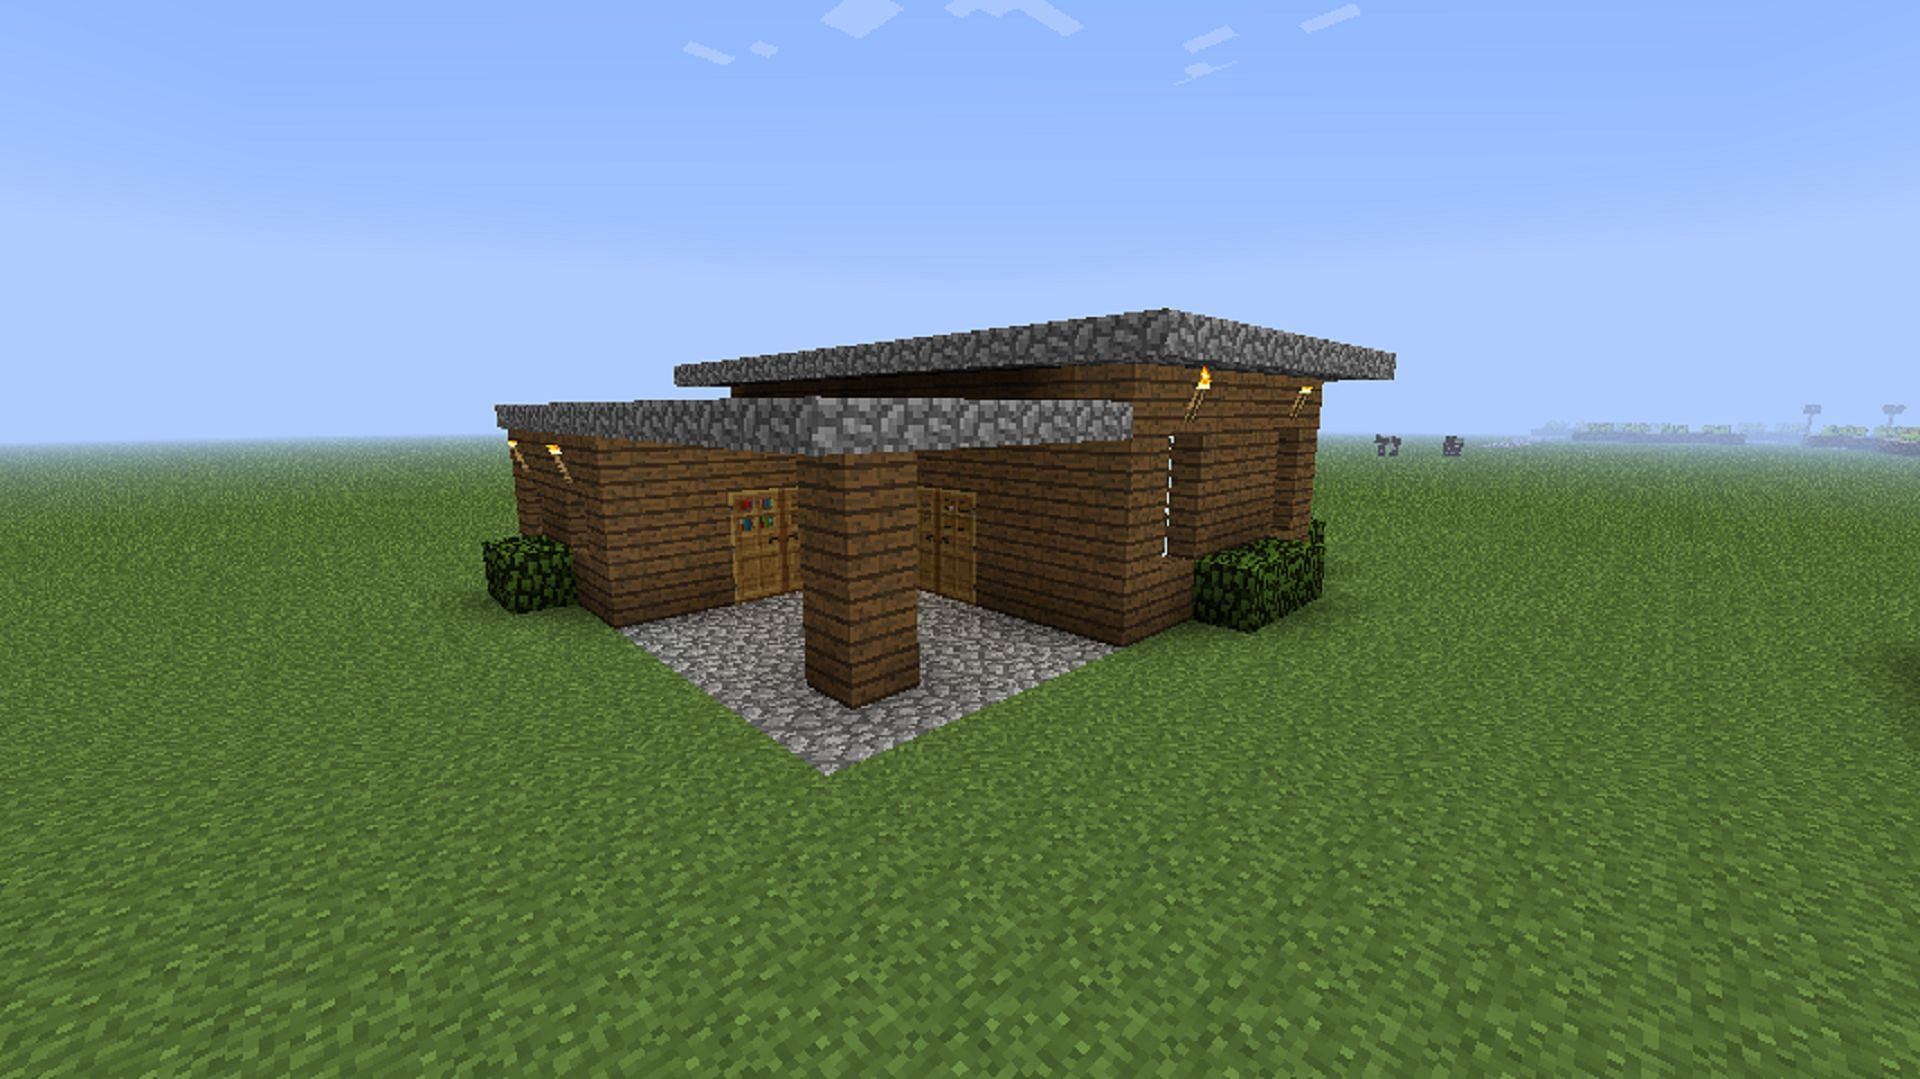 This house blends accessible materials and a sleek design (Image via ChaosGuardian/Minecraft Forum)